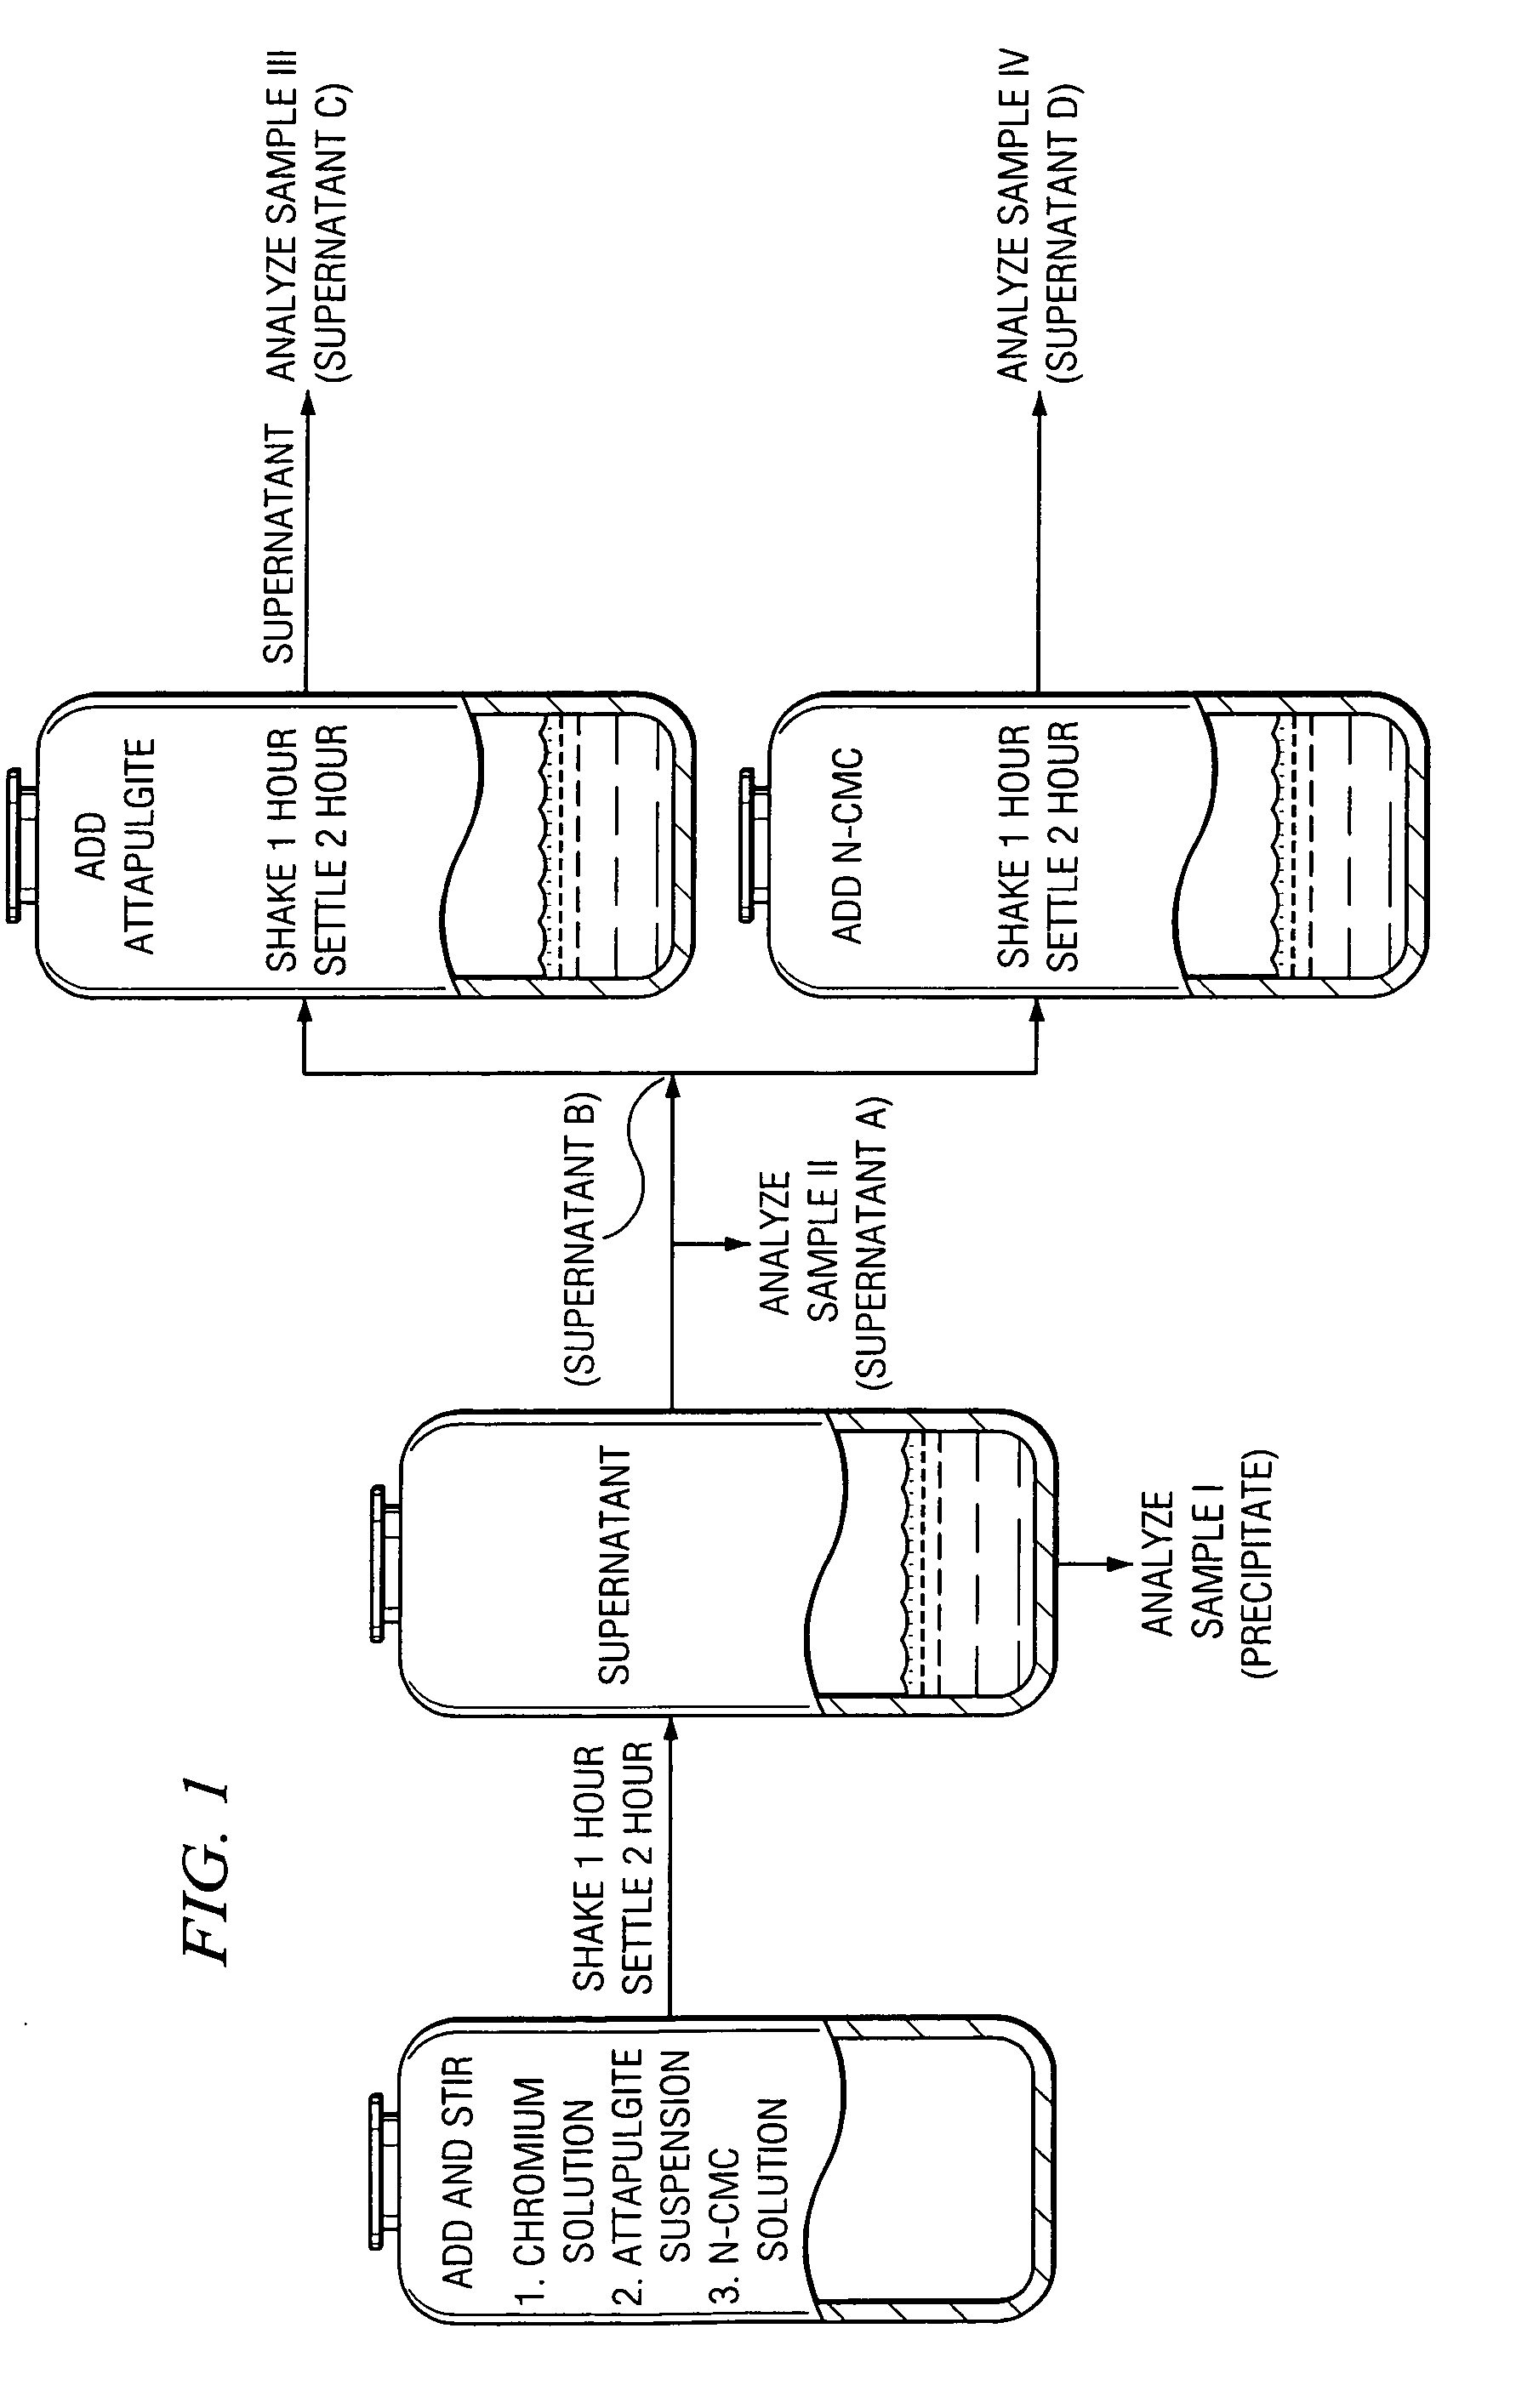 Compositions and methods for removal of toxic metals and radionuclides